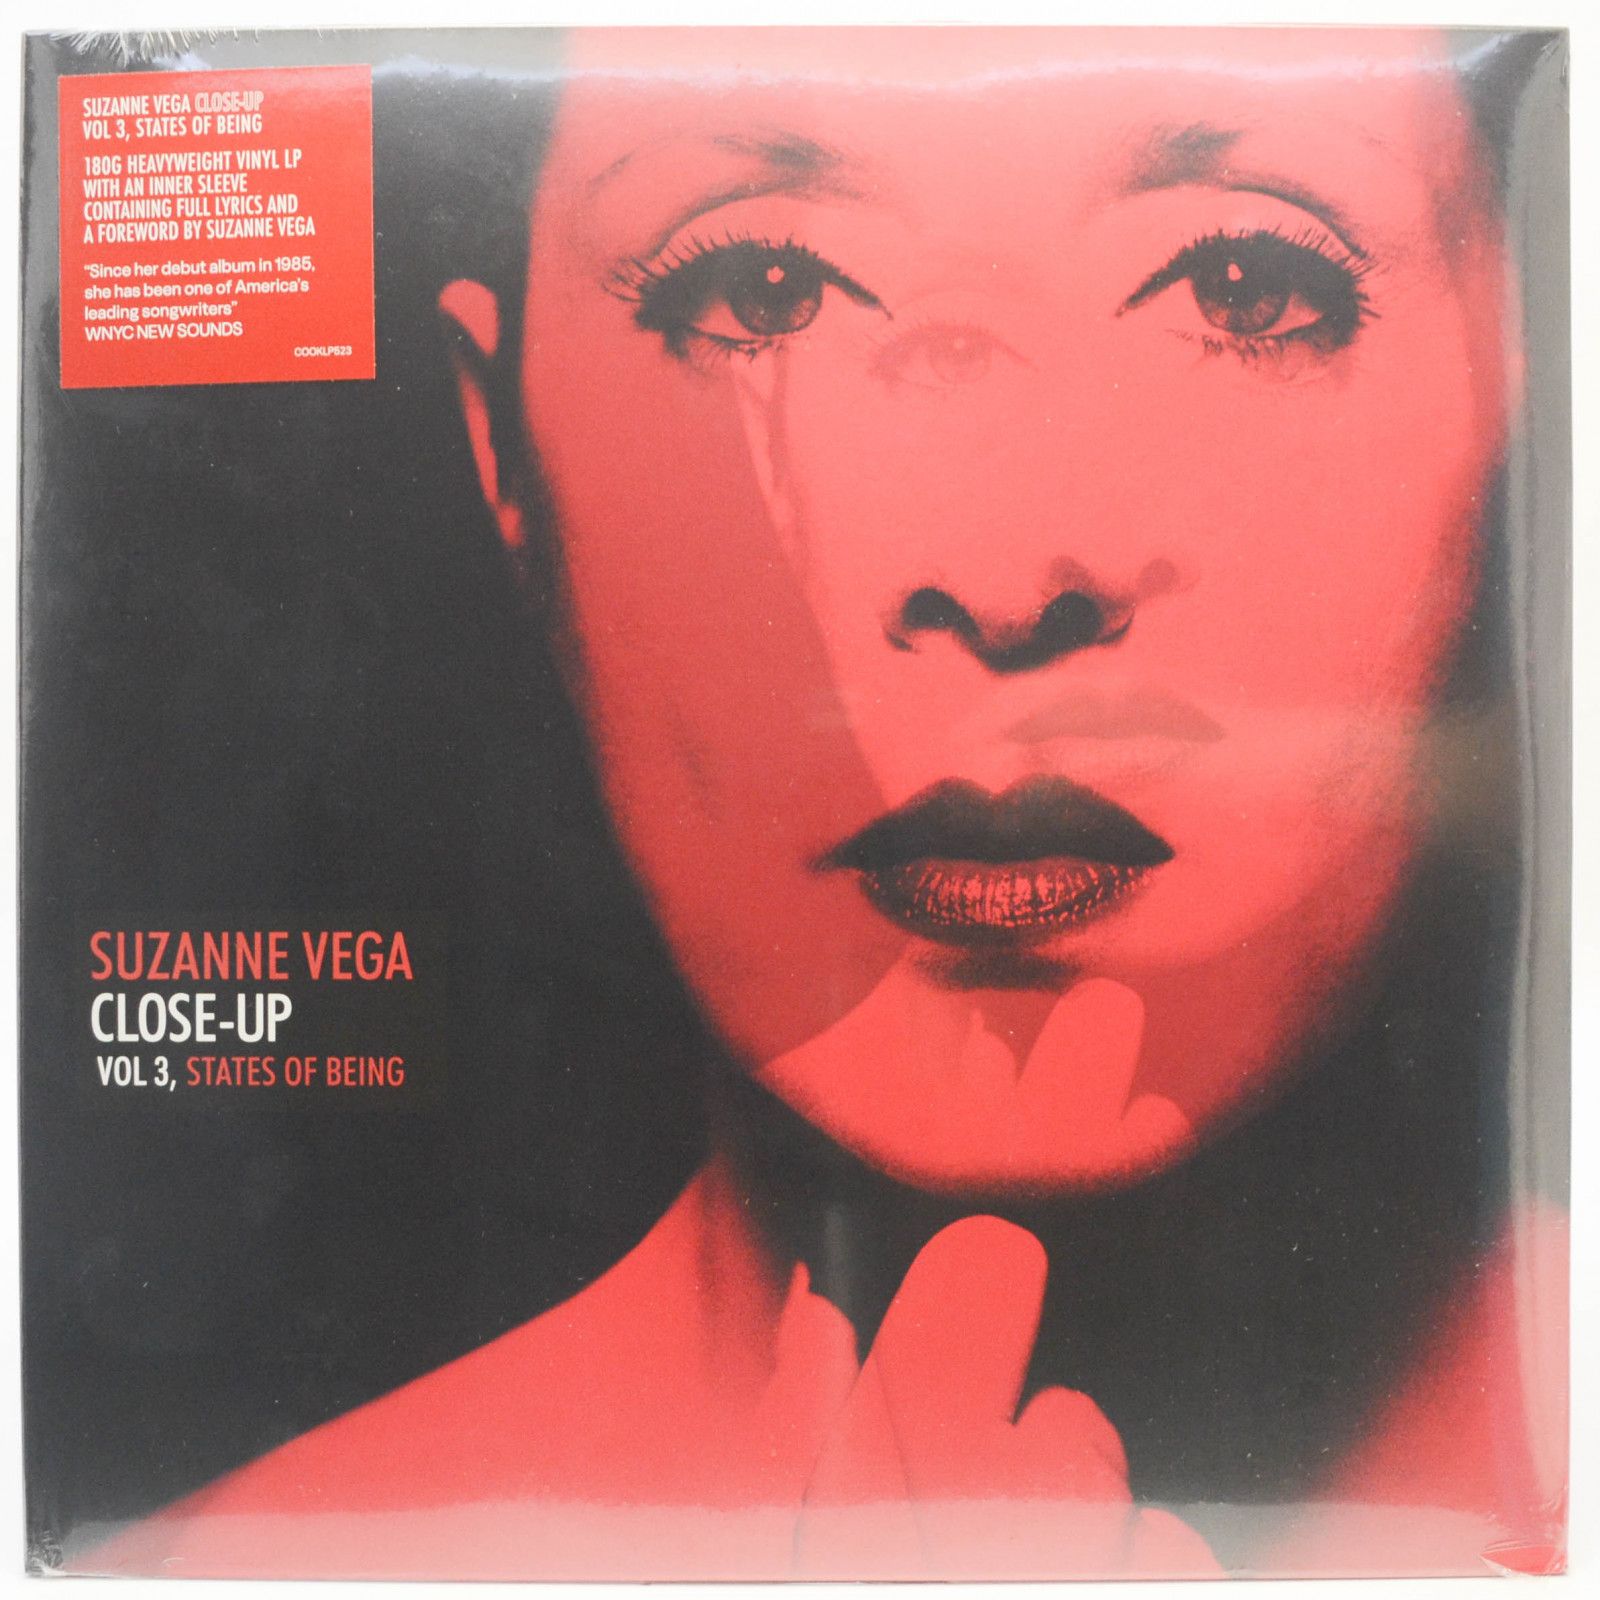 Suzanne Vega — Close-Up Vol 3, States Of Being, 2011